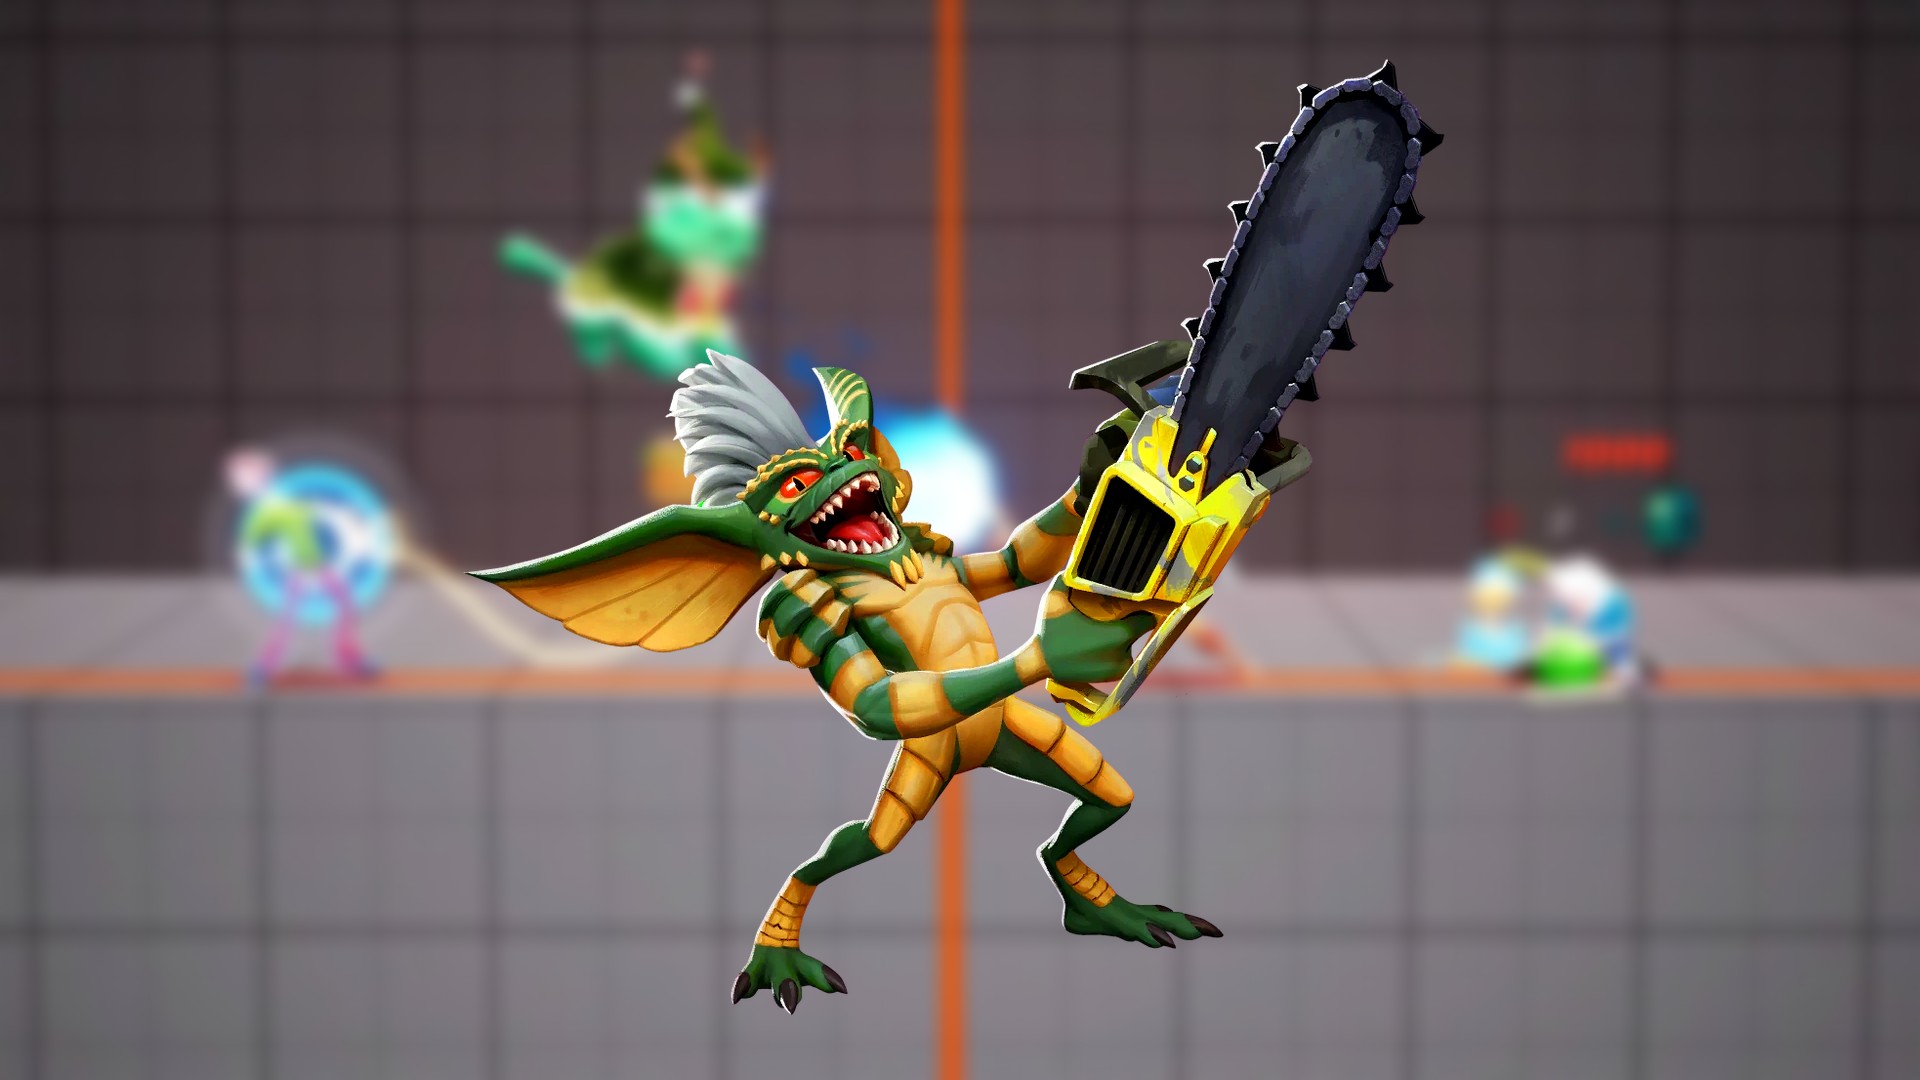 MultiVersus Tier List: Stripe can be seen with his chainsaw